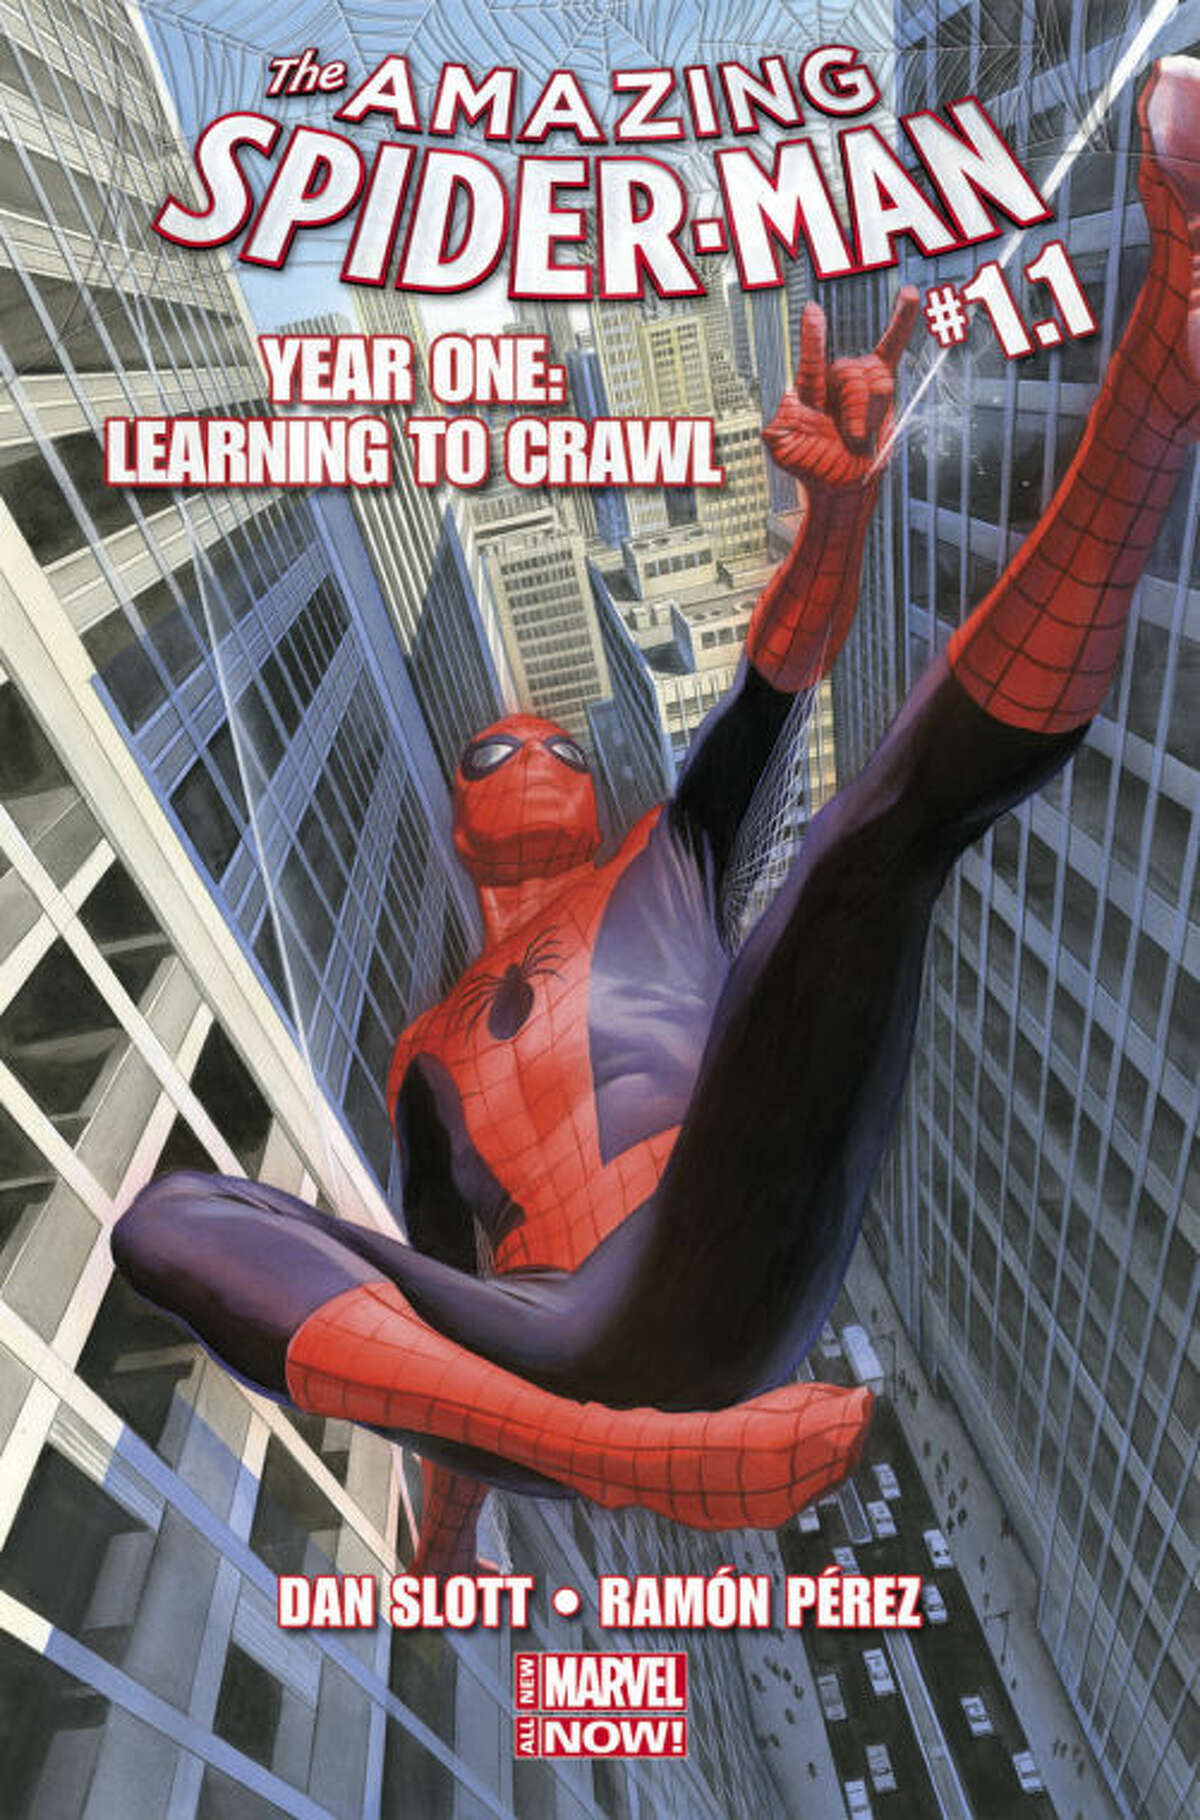 This image released by Marvel shows "The Amazing Spider-Man, Year One: Learning to Crawl," by Dan Slott and Ramon Perez. (AP Photo/Marvel)